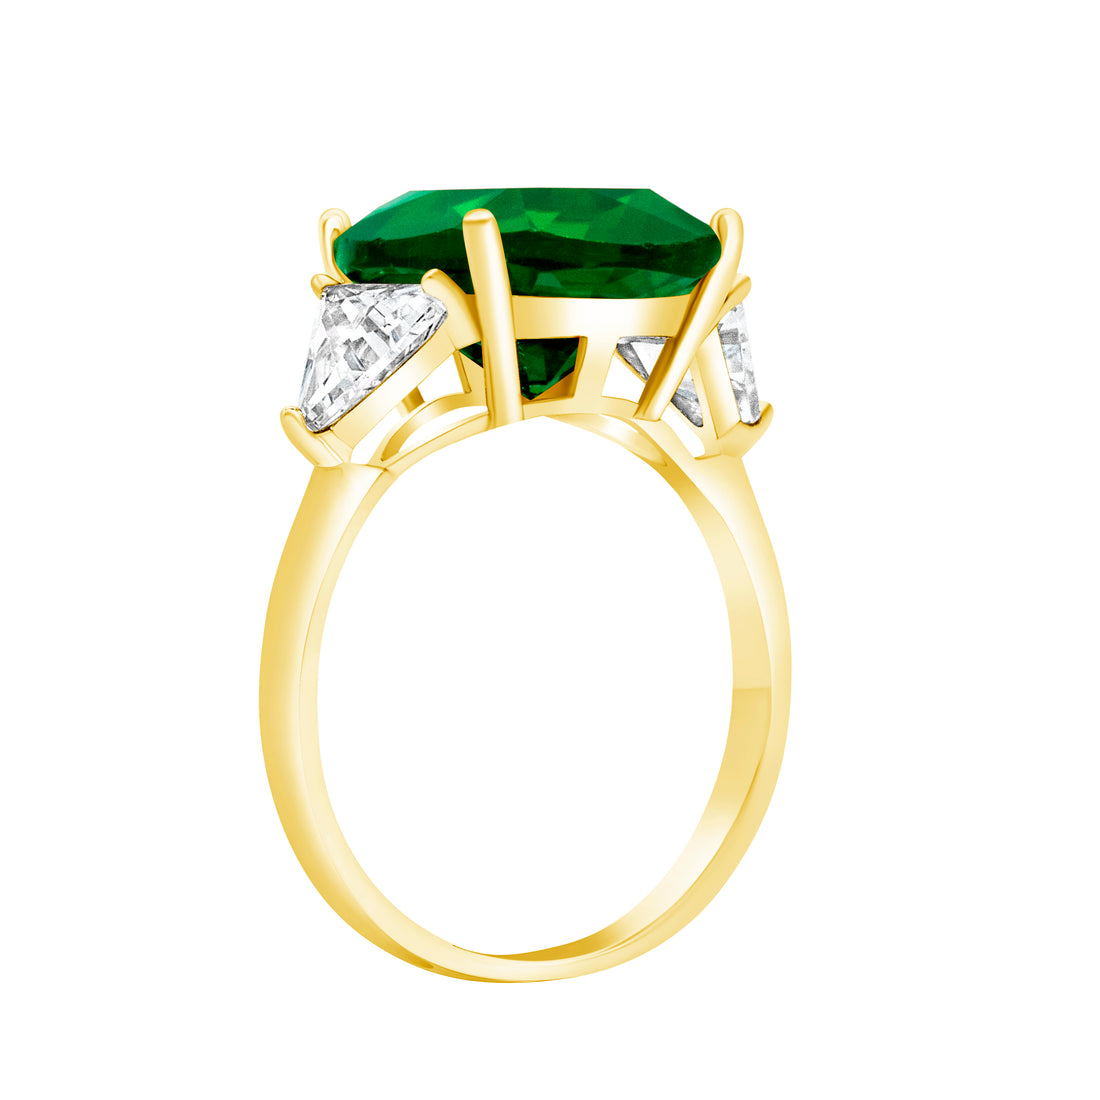 Silver, Gold Plated with Green Zircon Ring